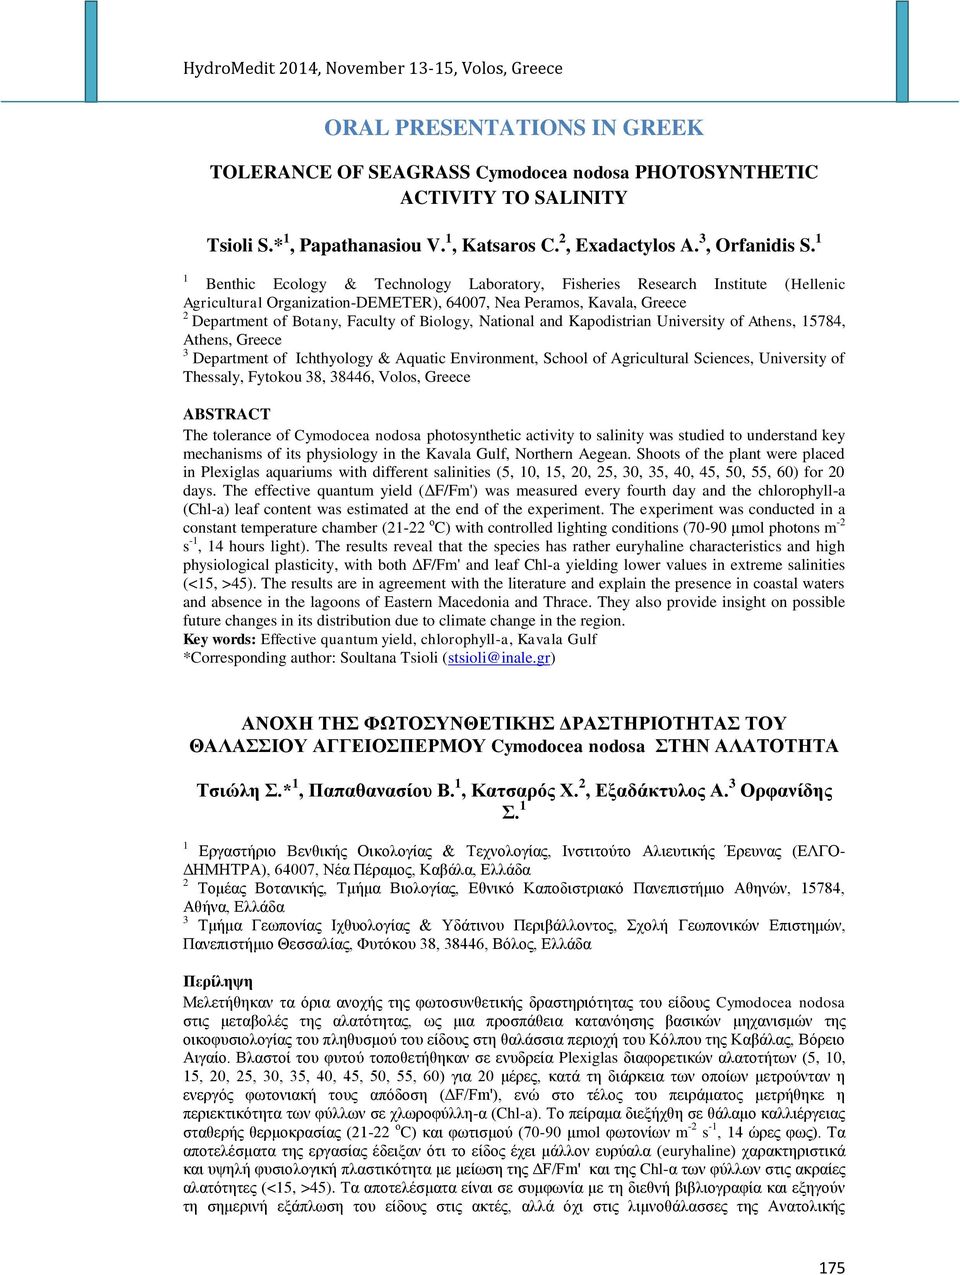 National and Kapodistrian University of Athens, 15784, Athens, Greece 3 Department of Ichthyology & Aquatic Environment, School of Agricultural Sciences, University of Thessaly, Fytokou 38, 38446,